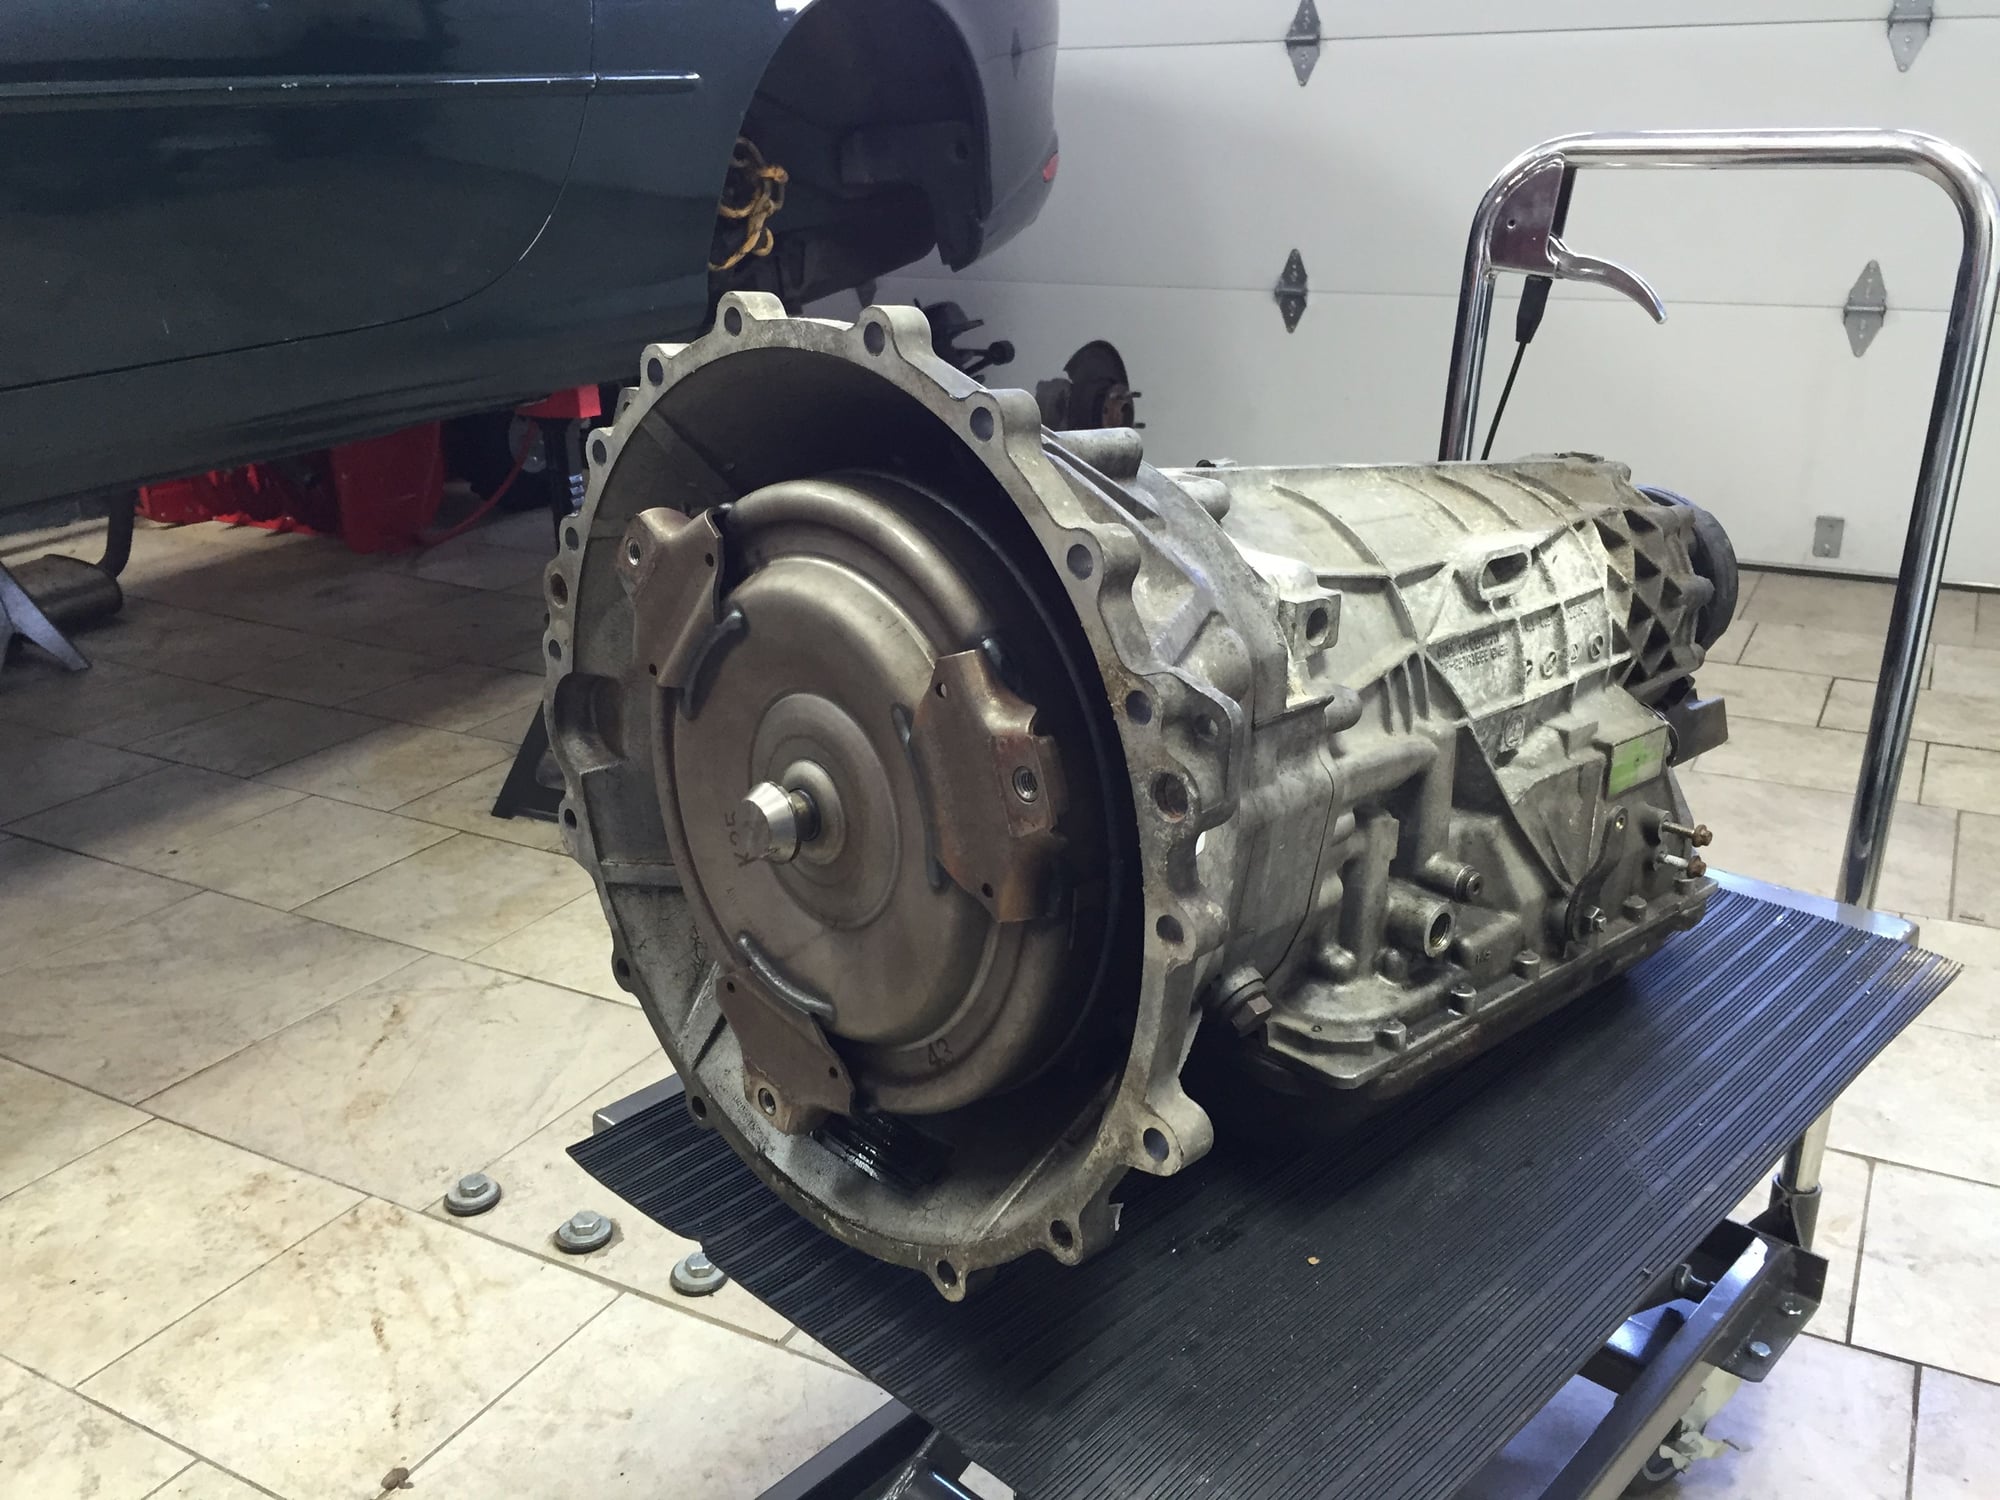 Drivetrain - 5HP24 transmission out of a 2000 XK8 - Used - 1997 to 2002 Jaguar XK8 - Venice, FL 34293, United States